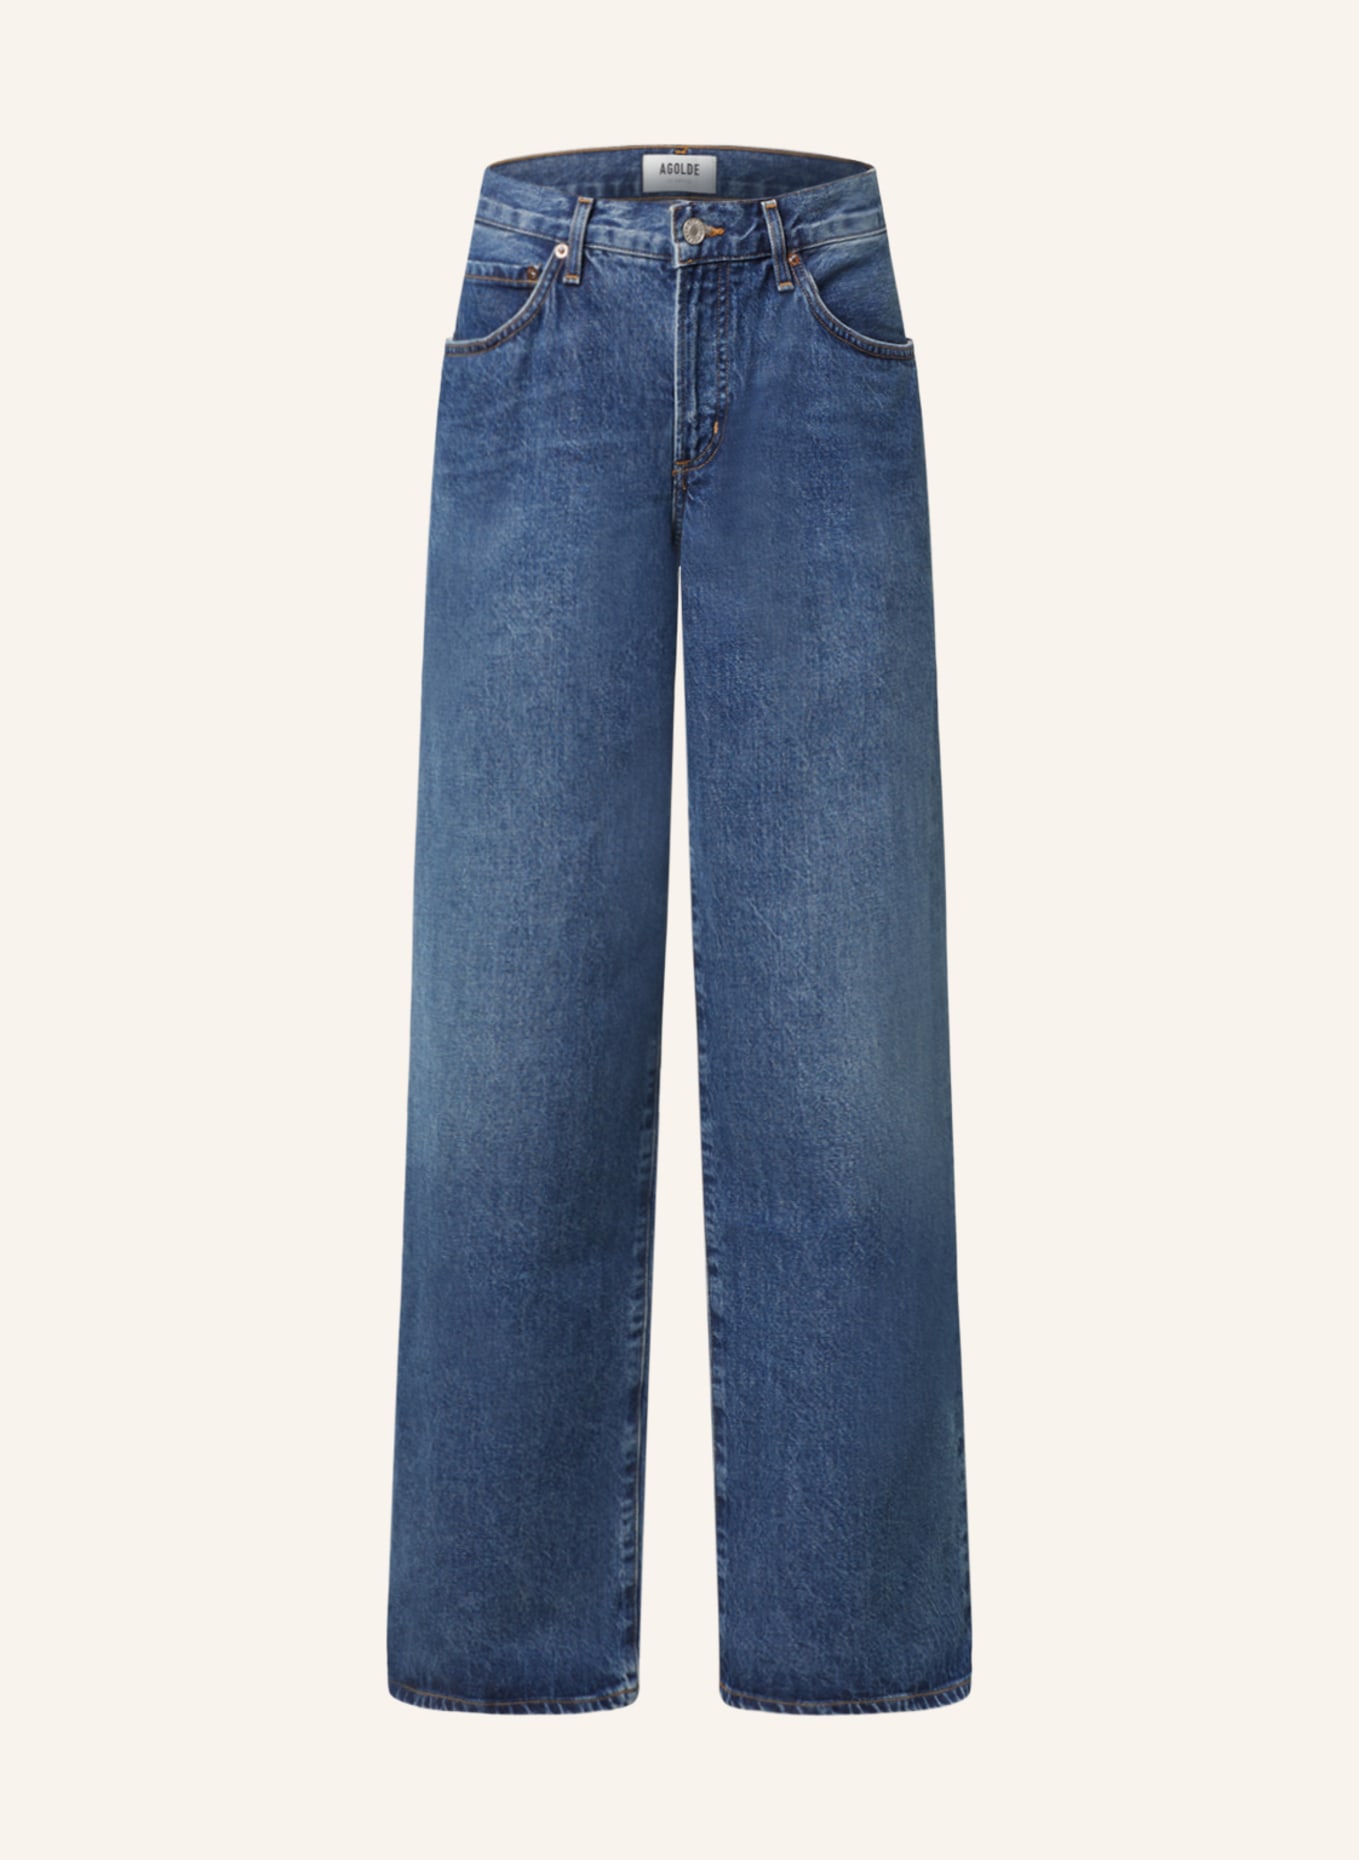 AGOLDE Jeans FUSION JEAN, Farbe: ambition dk ind (Bild 1)